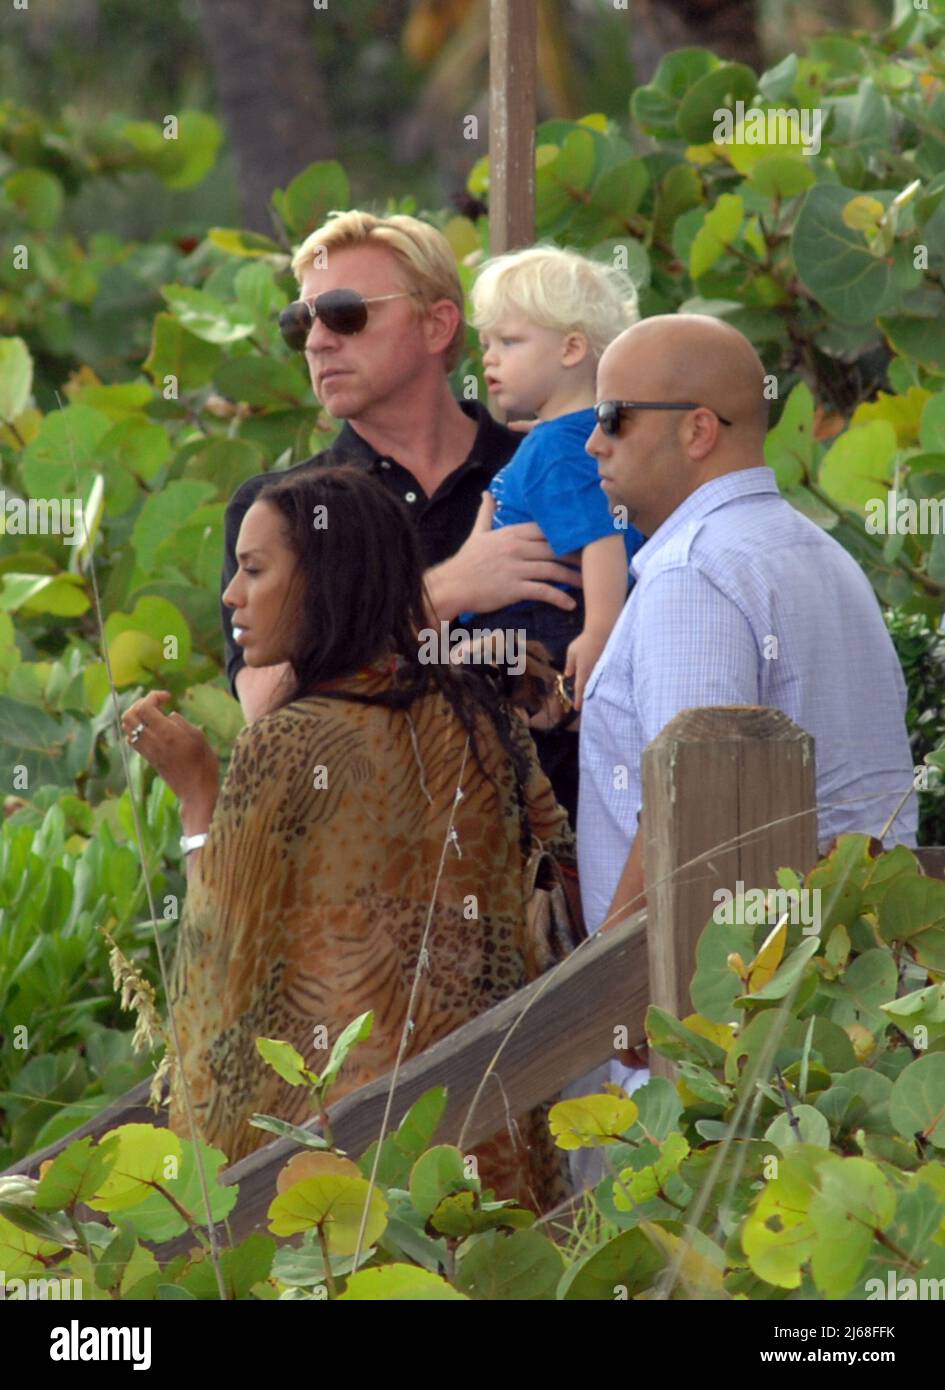 MIAMI BEACH, FL - SEPTEMBER 04: Tennis champ Boris Becker's and wife Sharlely Kerssenberg ('Lilly', model, m. Jun-2009, one son), spend some pool time with their sons Noah Gabriel (b. 18-Jan-1994), Elias Balthasar (b. 4-Sep-1999), and 1-year-old son Amadeus. Lilly and Boris were at the pool with Boris's X-wife Barbara Feltus (m. 17-Dec-1993, div. 15-Jan-2001, two sons) for one of her sonÕs birthday.  On September 4, 2011 in Miami, Florida.    People:   Boris Becker Amadeus Becker Stock Photo